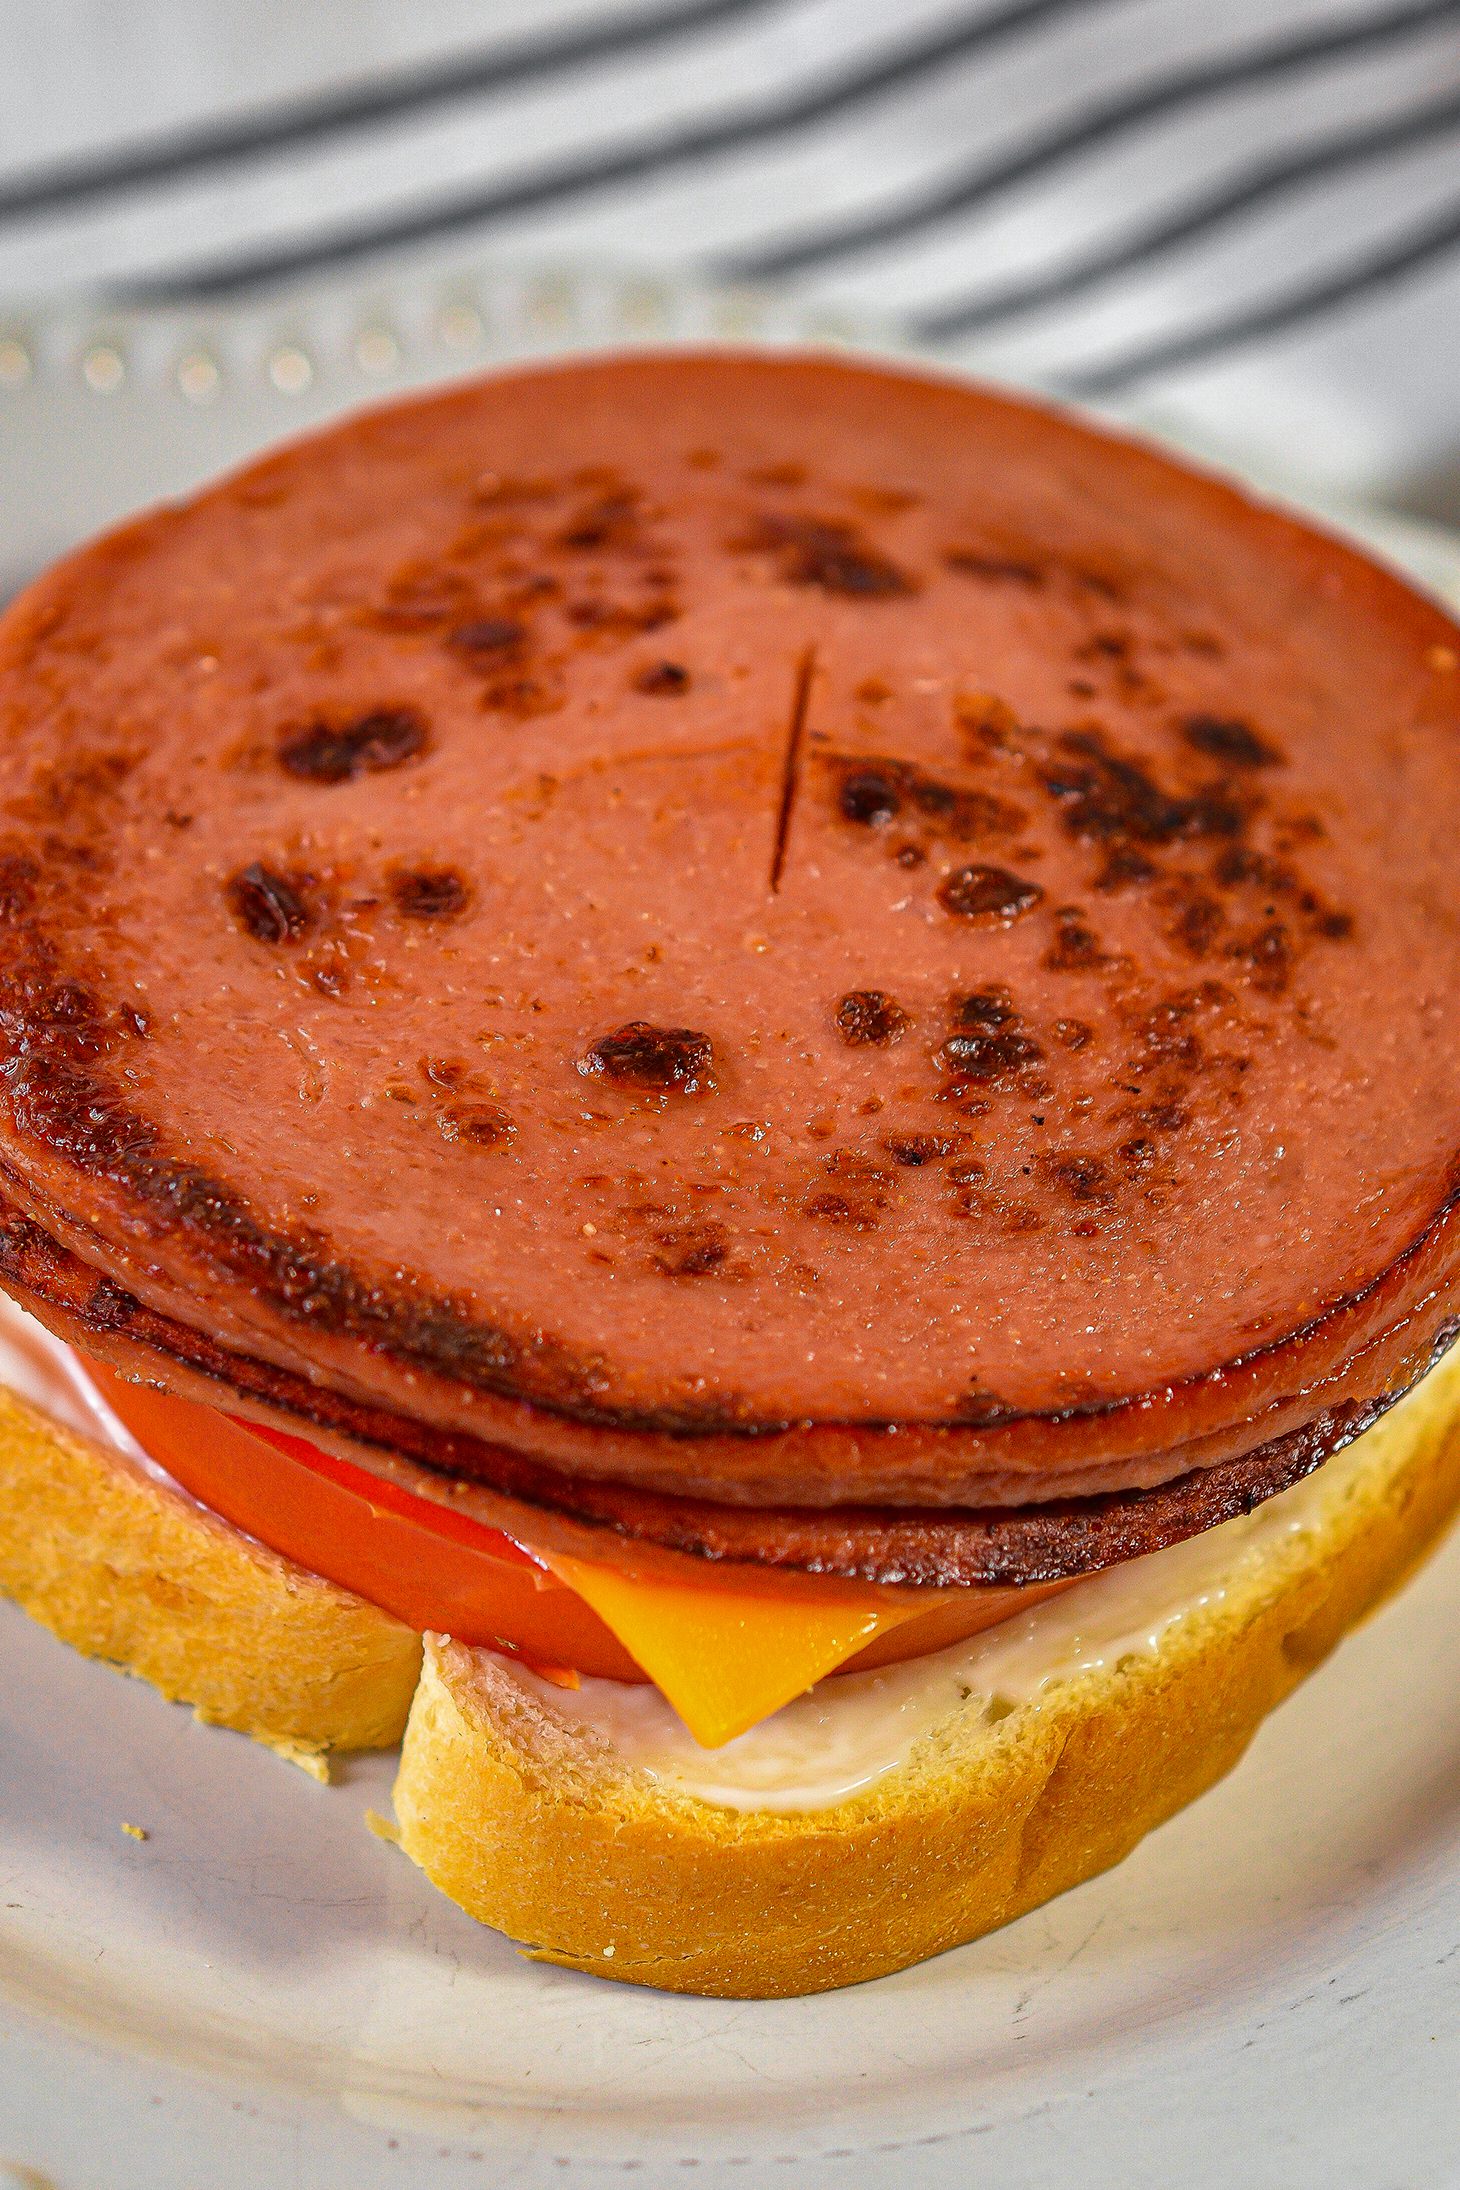 Slice an x through the center of each piece of bologna, and place them into the skillet.